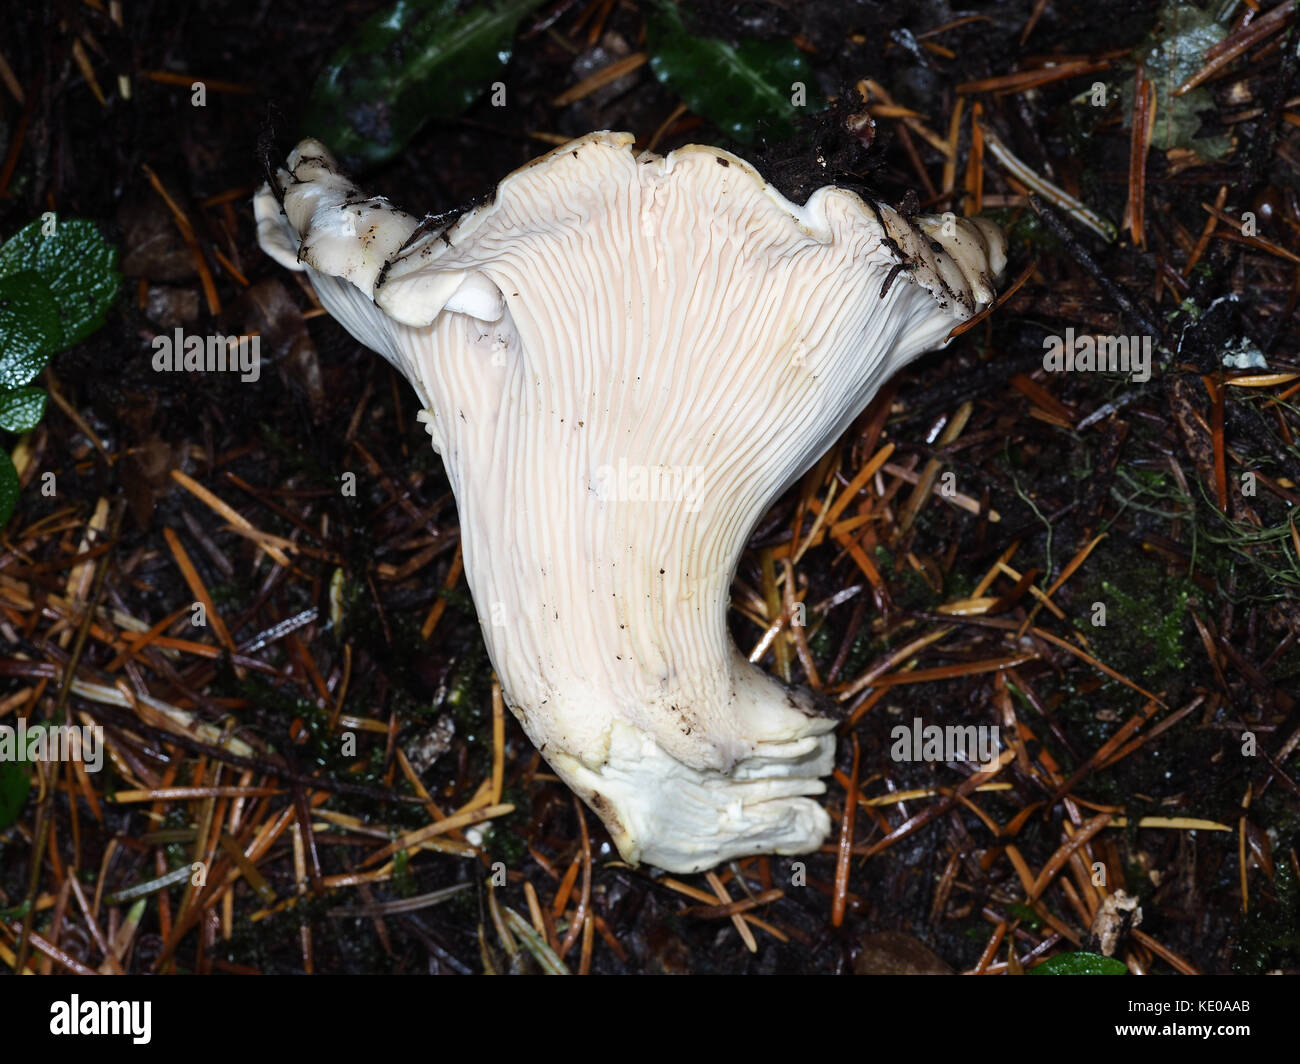 Harvested wild white chanterelle (Cantharellus subalbidus - choice edible mushroom) lying on the ground in a Pacific Northwest forest Stock Photo